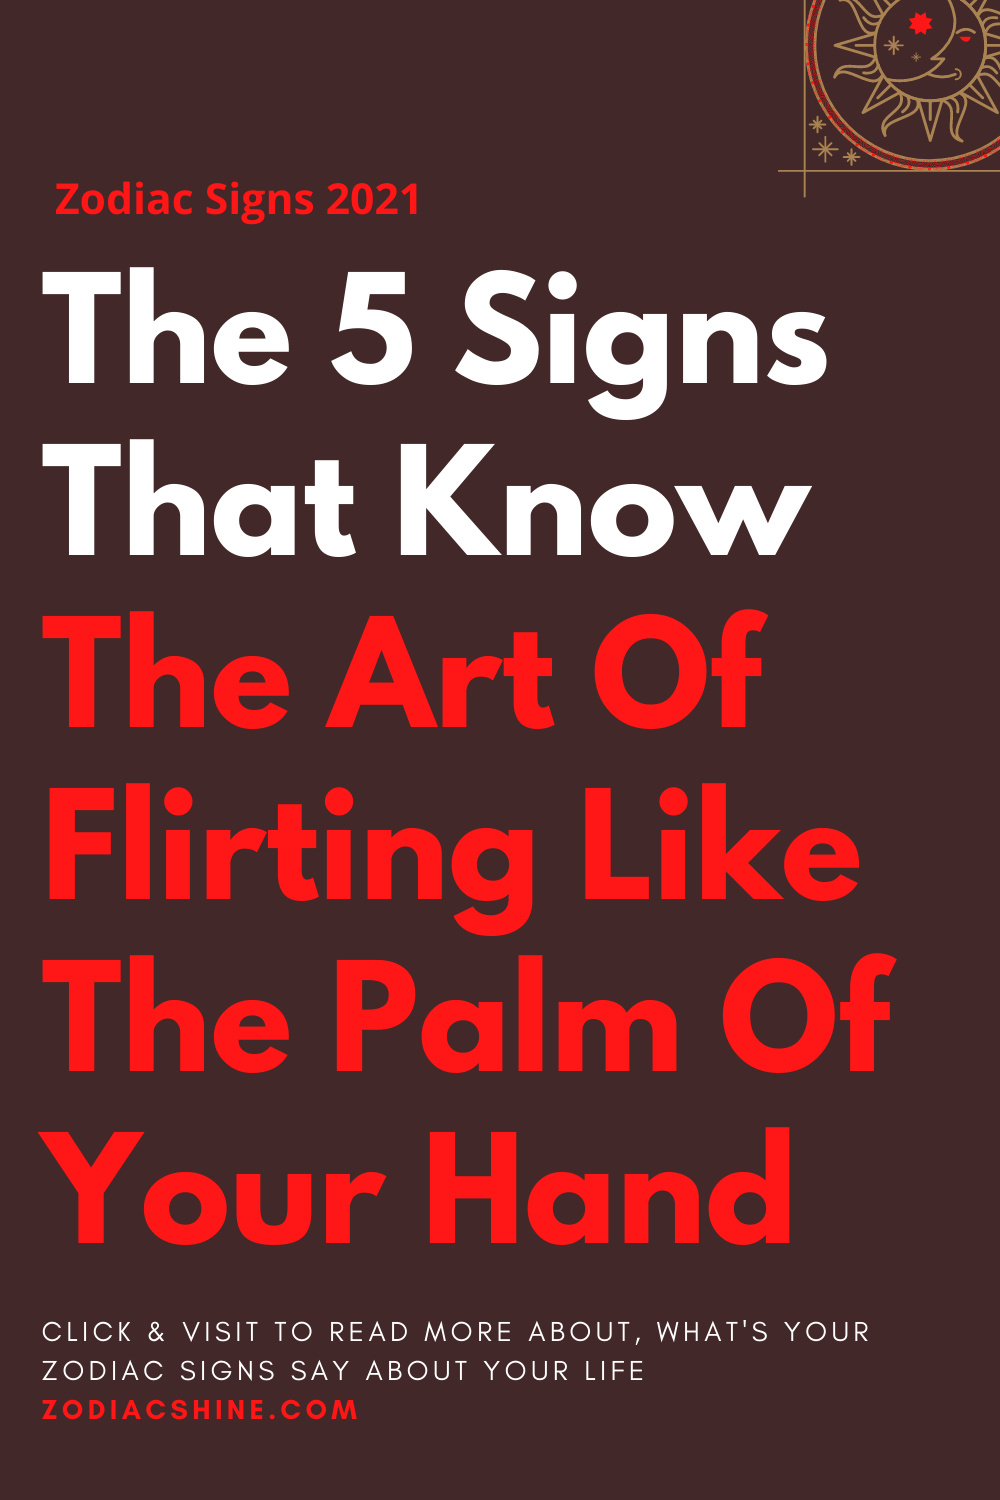 The 5 Signs That Know The Art Of Flirting Like The Palm Of Your Hand